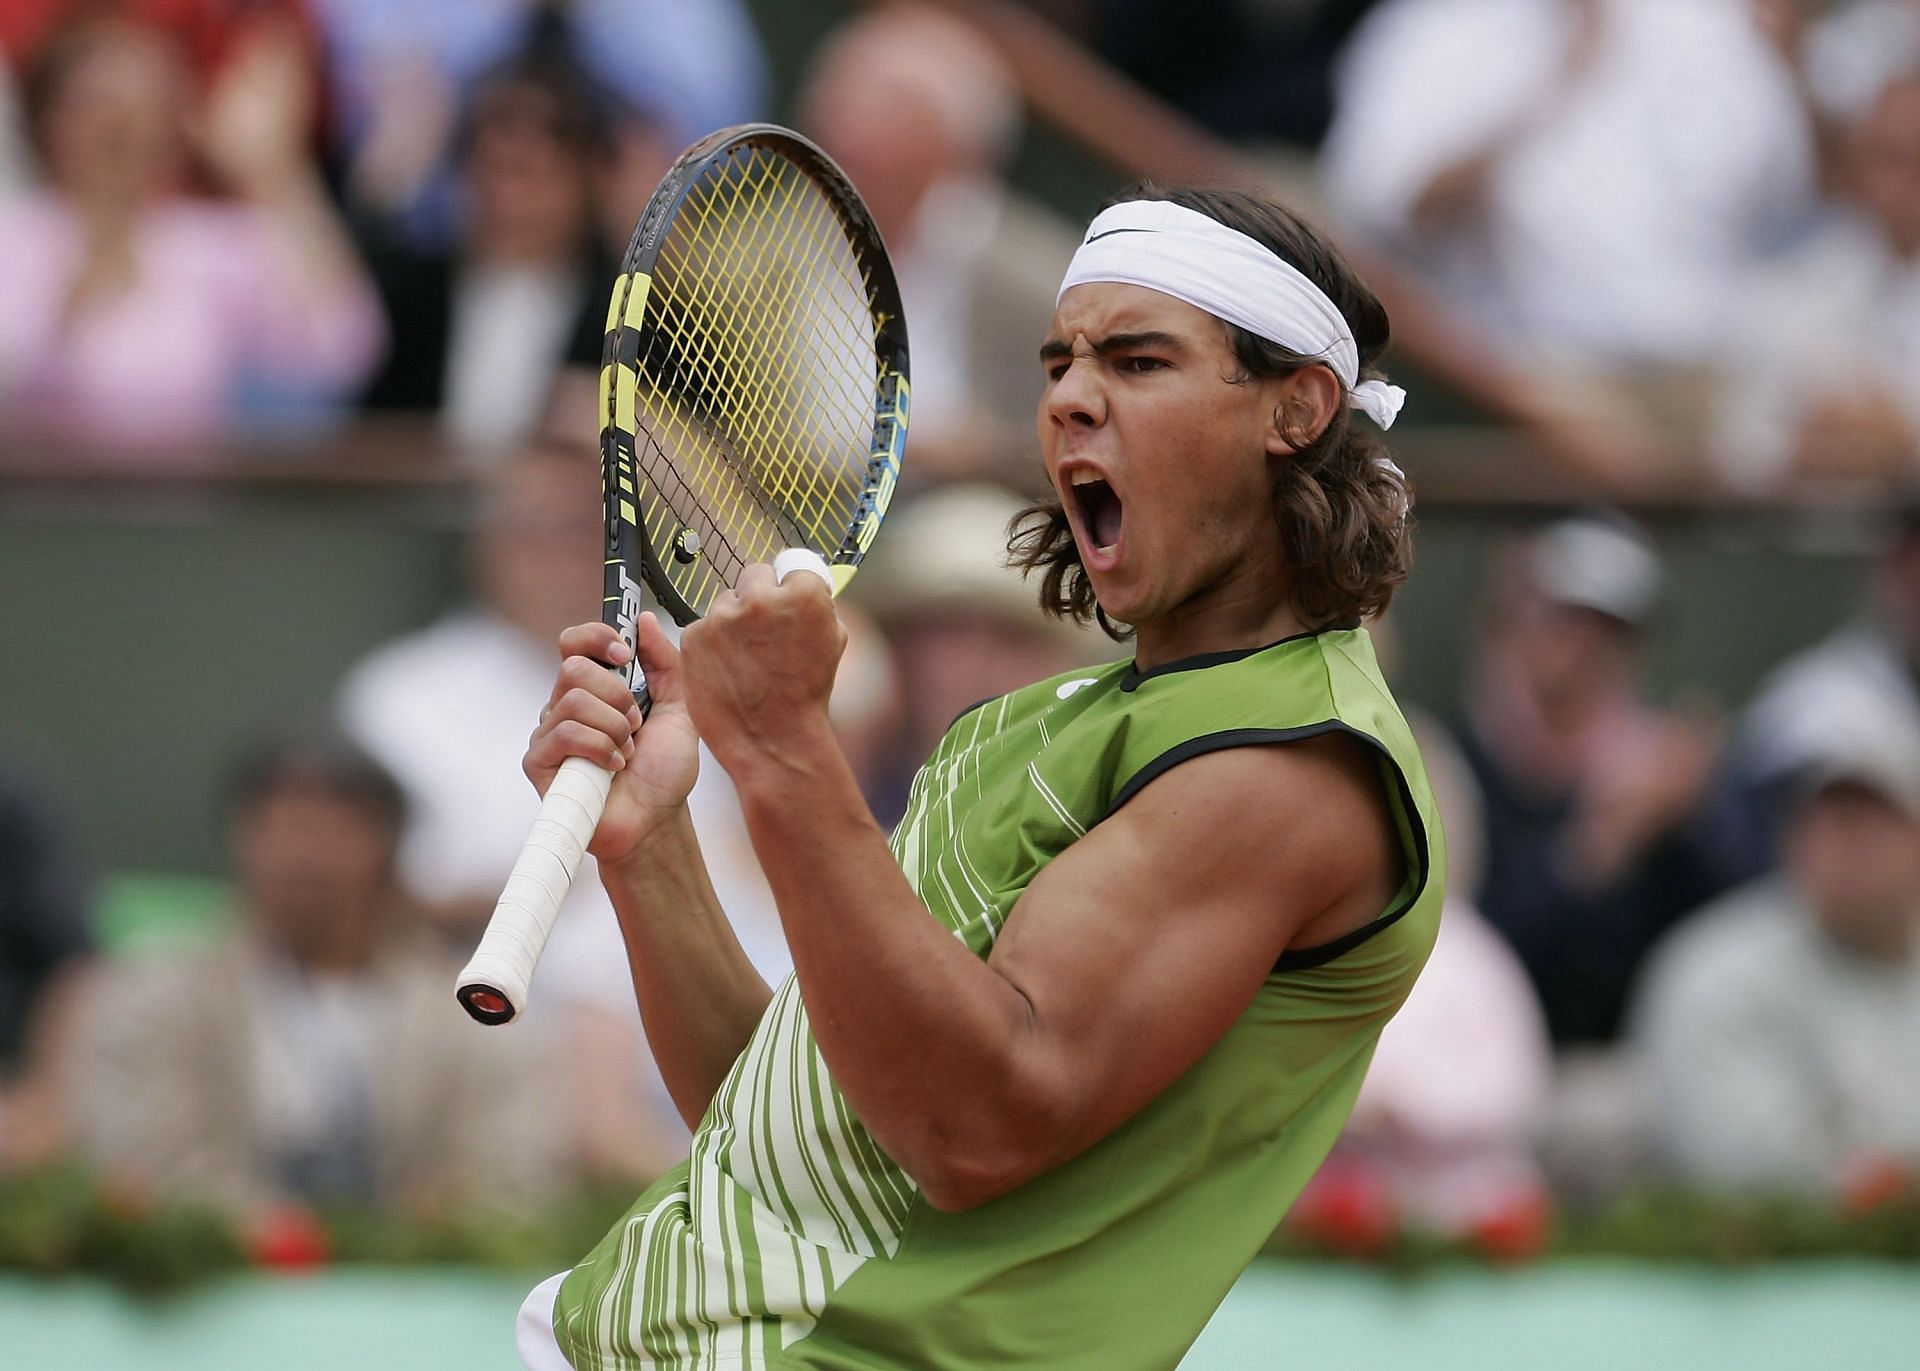 An 18-year-old Rafael Nadal at the 2005 French Open